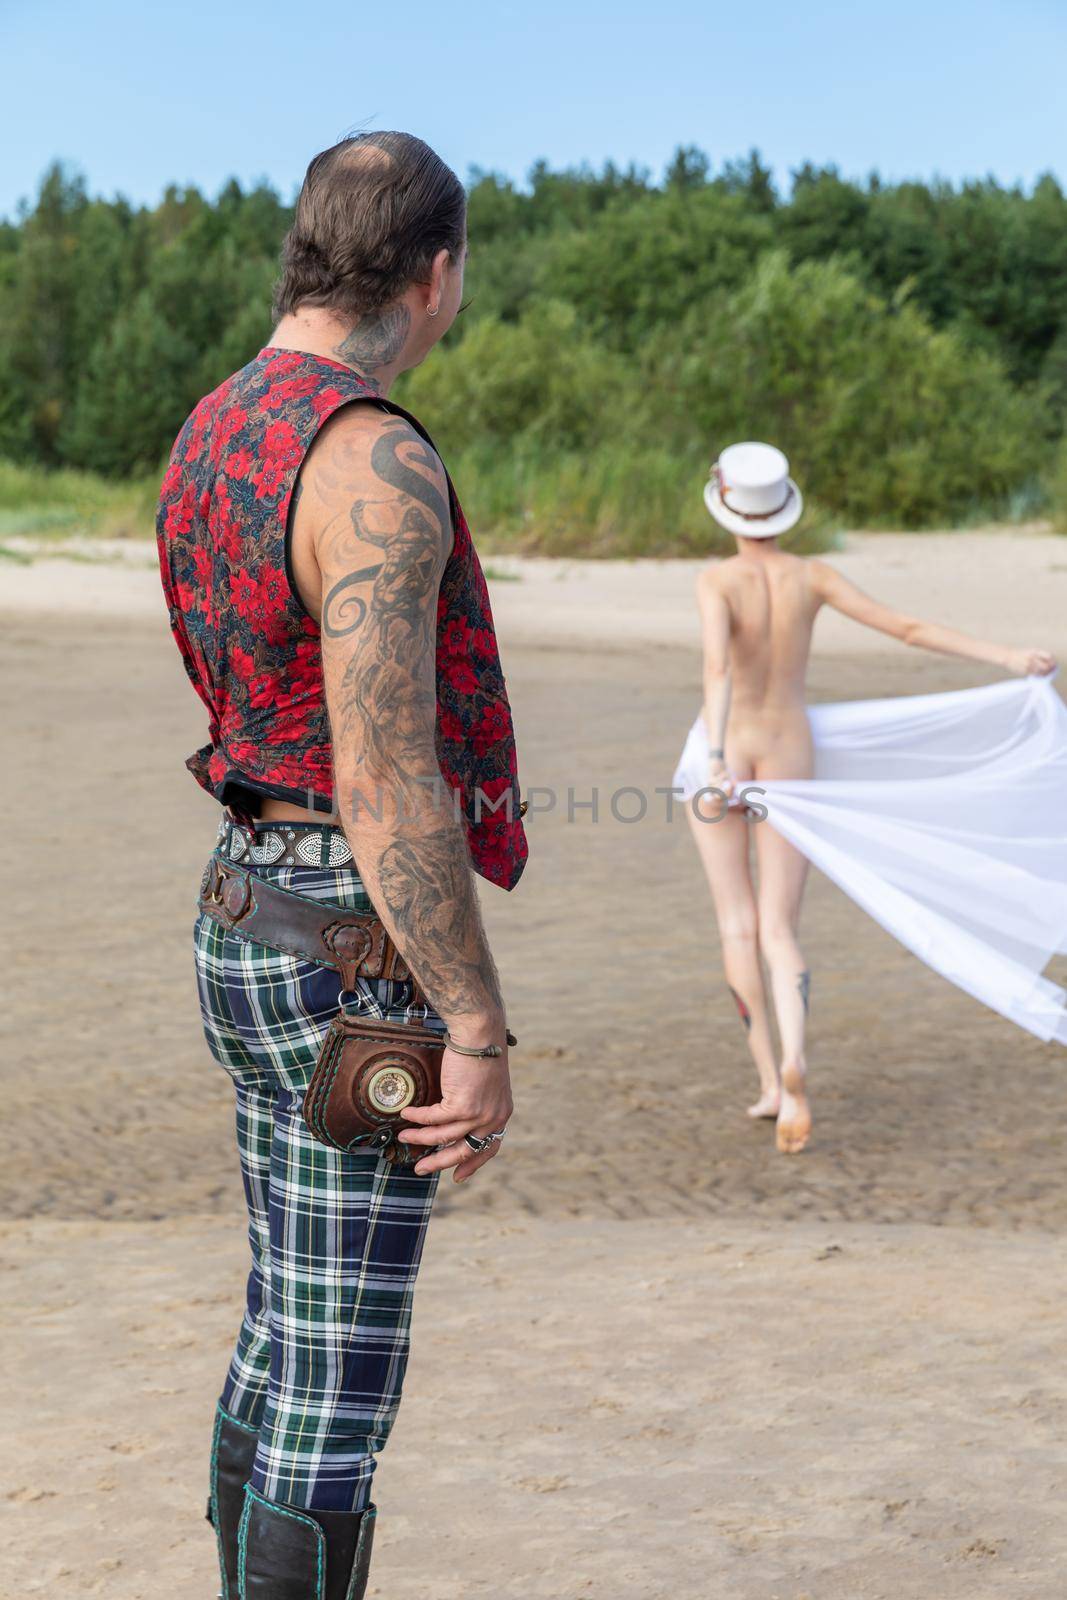 AINAZI, LATVIA – Jul 29, 2019: Love story. Non-traditional wedding photo shoot on the shores of the Baltic Sea. Nude bride in a veil and a spectacular groom